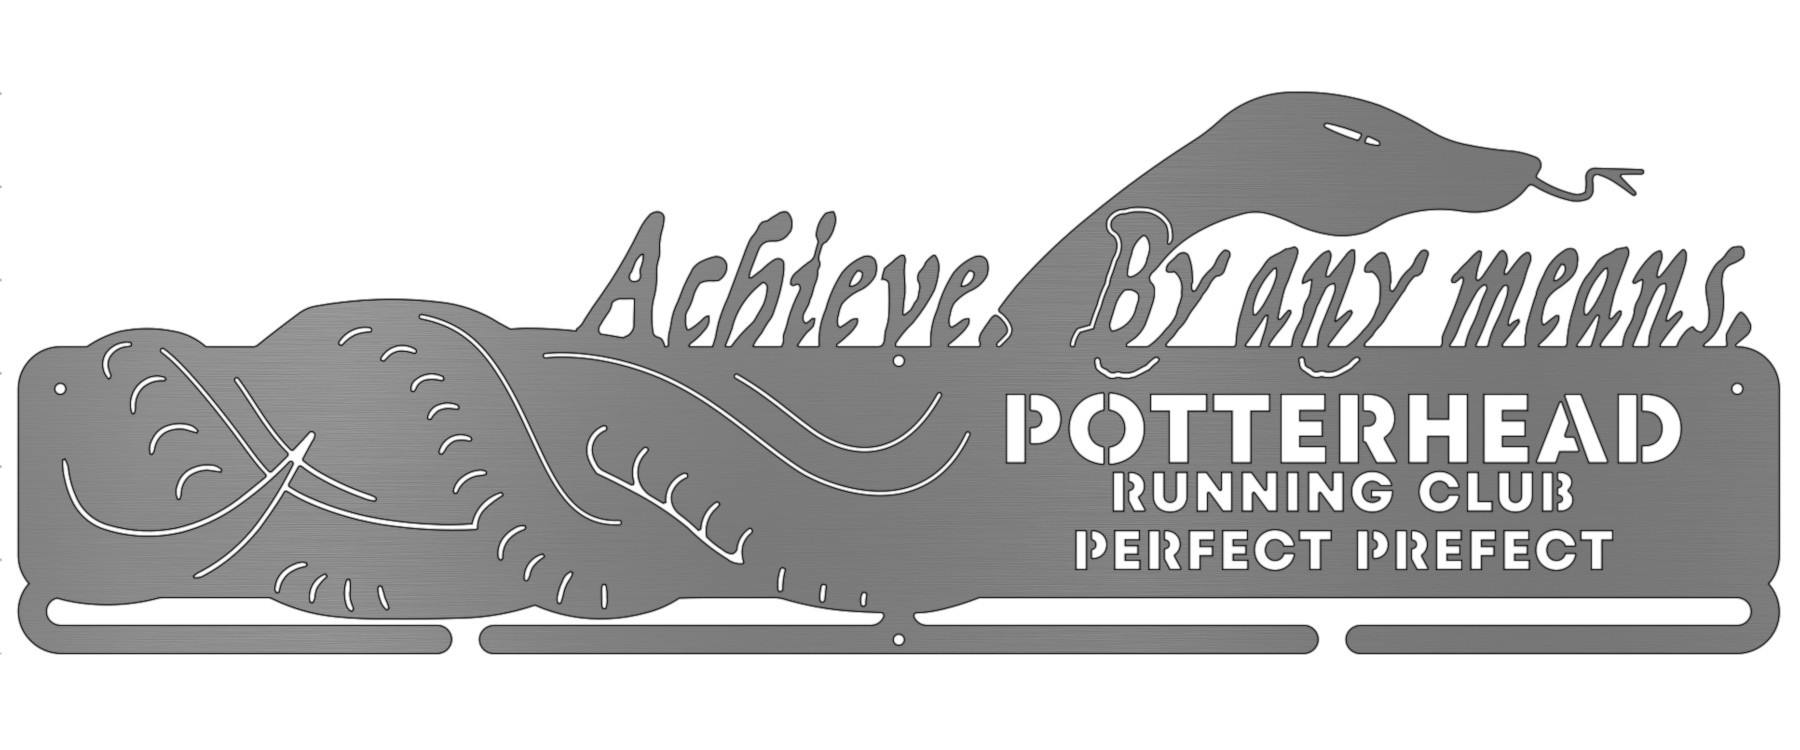 Potterhead Running Club - Achieve By Any Means - Perfect Prefect